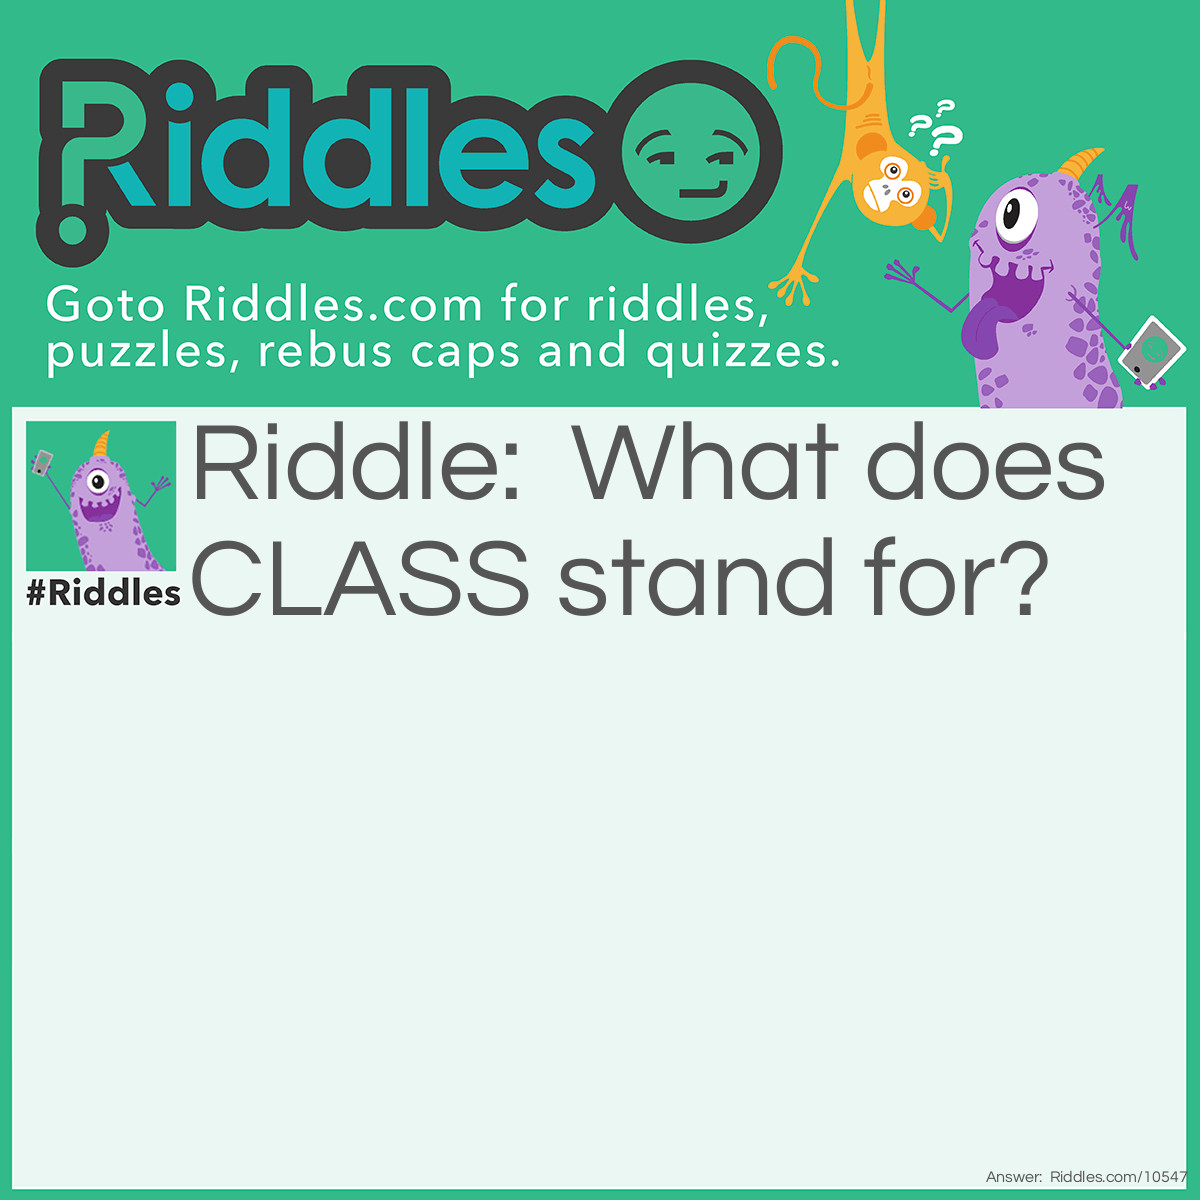 Riddle: What does CLASS stand for? Answer: Come Late And Start Sleeping.